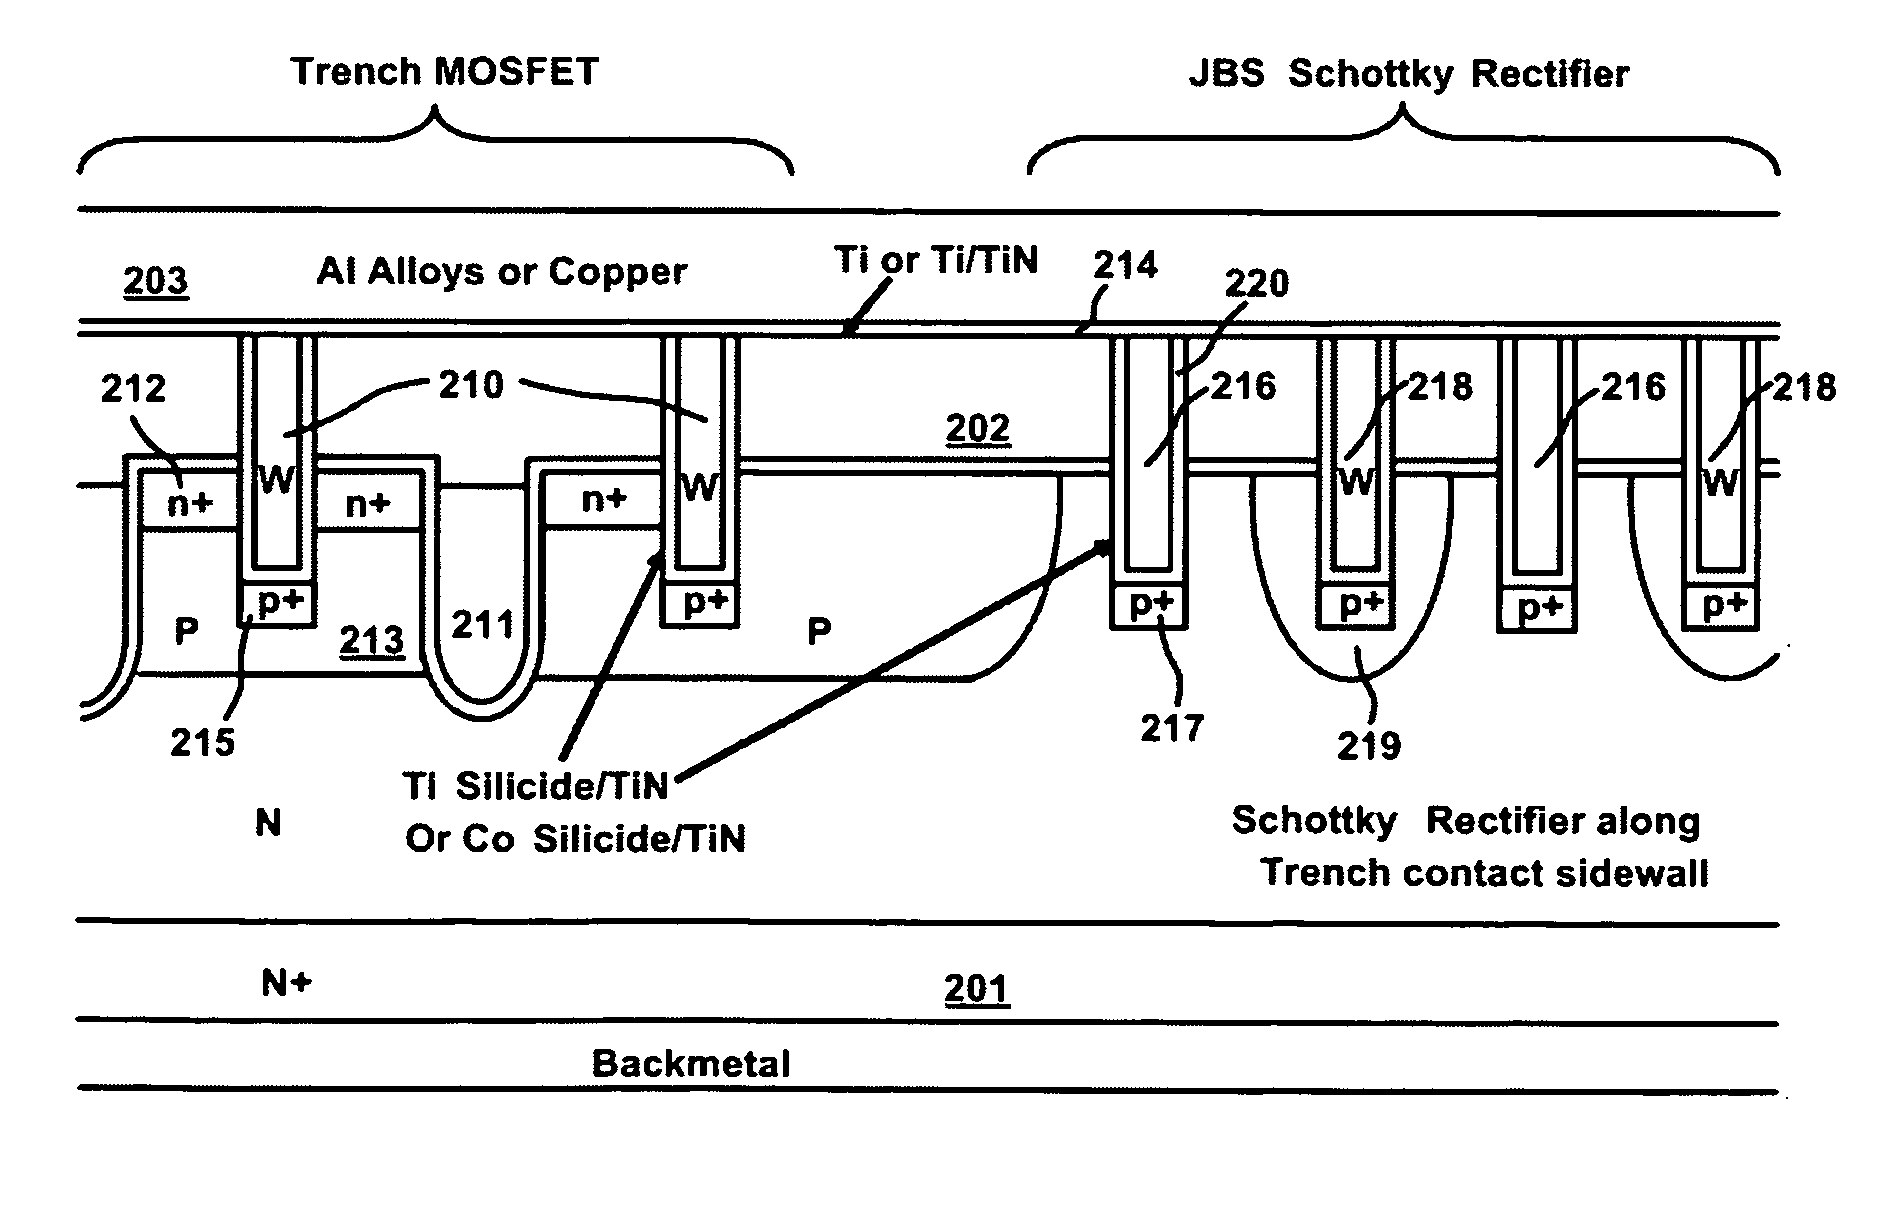 Integrated trench mosfet and junction barrier schottky rectifier with trench contact structures